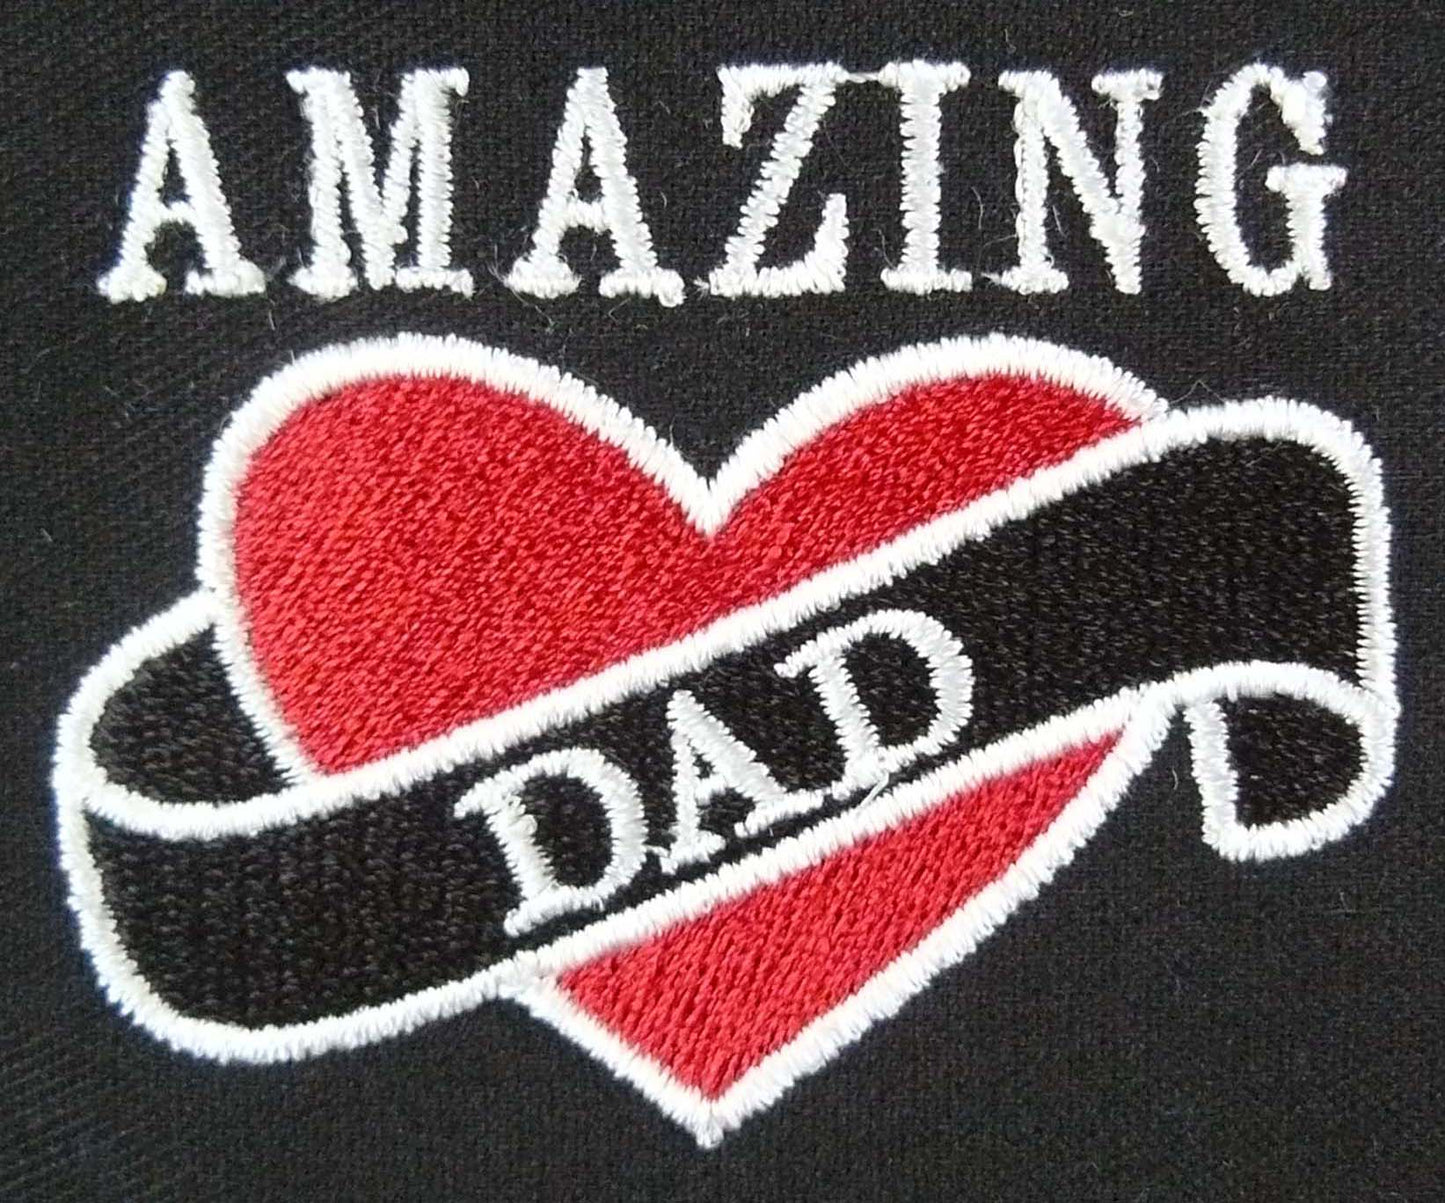 Amazing Dad Heart, Black Adult Small Apron